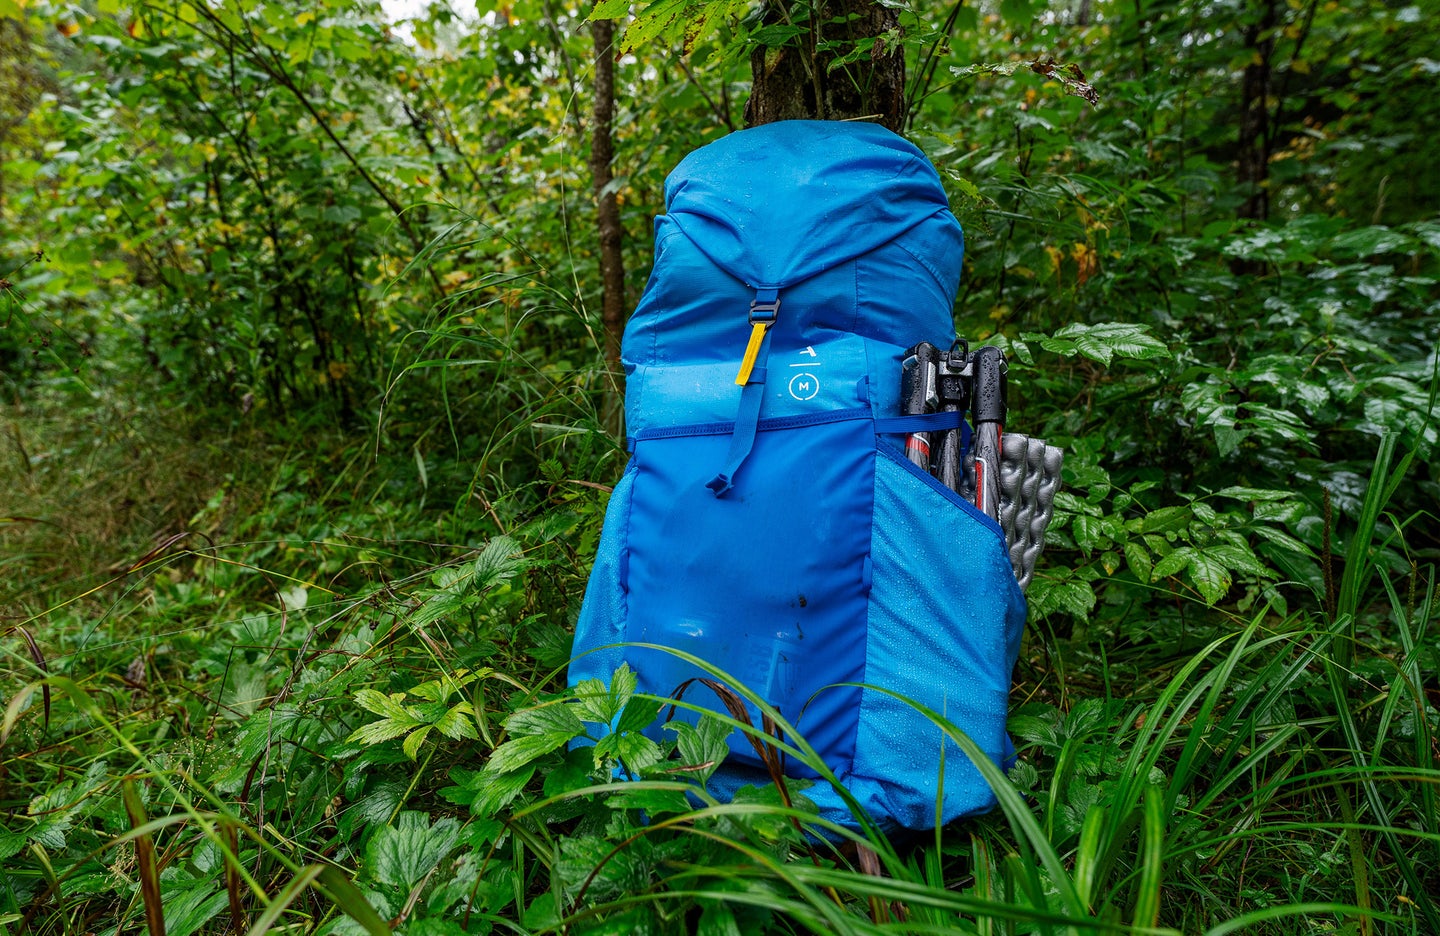 The Moment Strohl Mountain Light 45L is a very capable camera backpack.